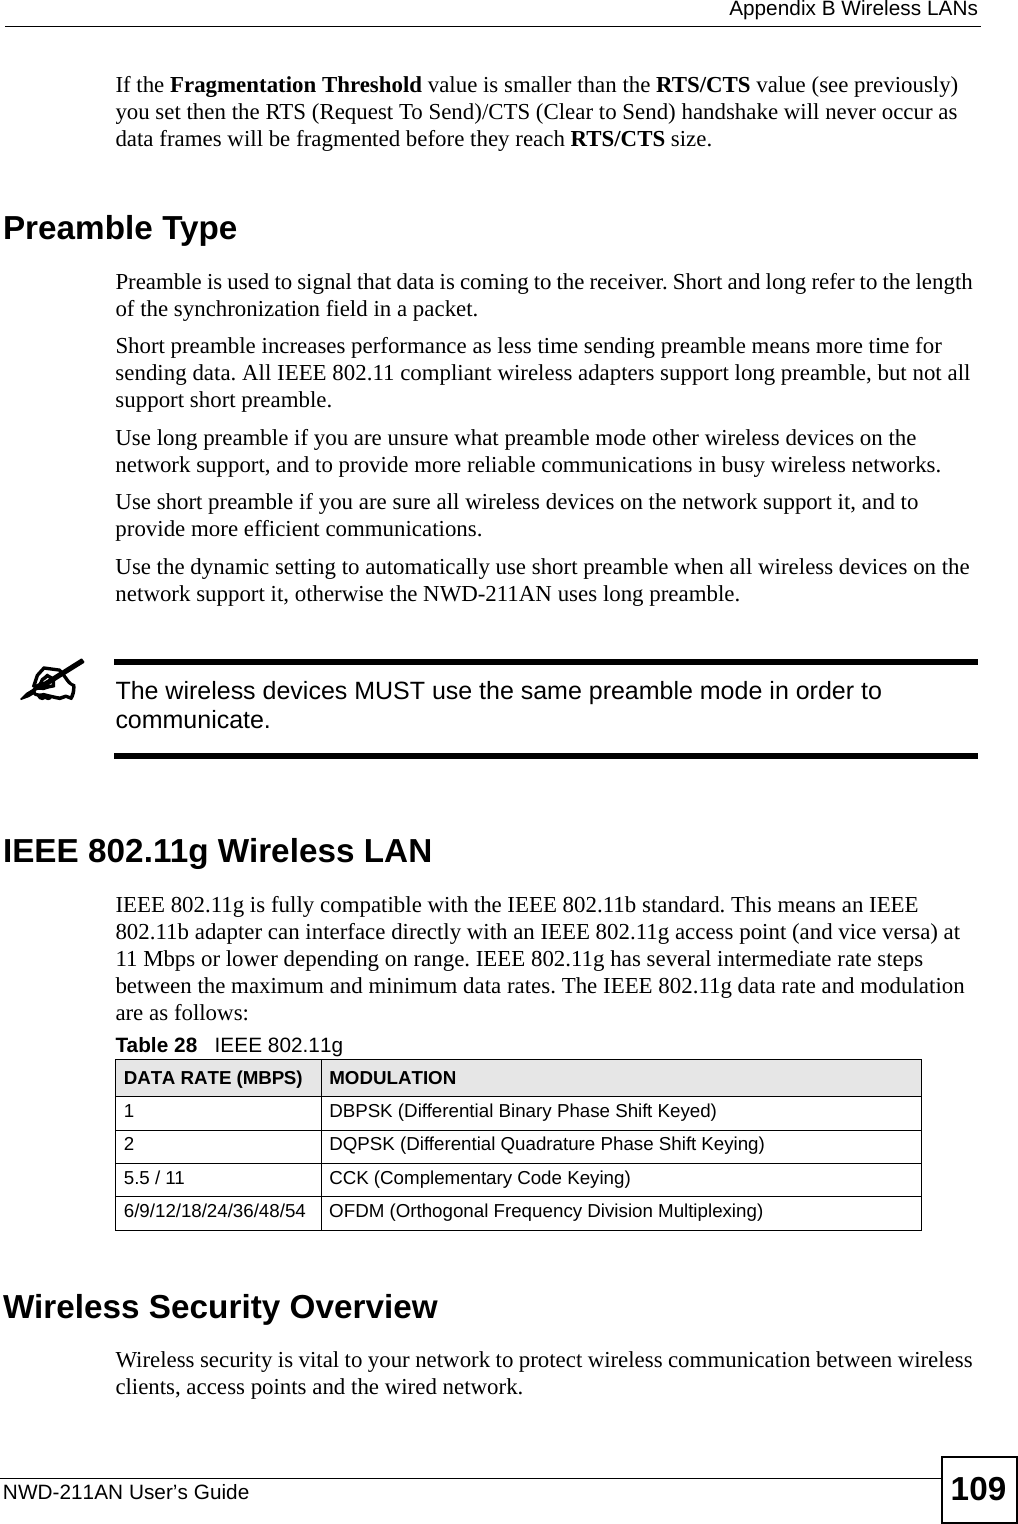  Appendix B Wireless LANsNWD-211AN User’s Guide 109If the Fragmentation Threshold value is smaller than the RTS/CTS value (see previously) you set then the RTS (Request To Send)/CTS (Clear to Send) handshake will never occur as data frames will be fragmented before they reach RTS/CTS size.Preamble TypePreamble is used to signal that data is coming to the receiver. Short and long refer to the length of the synchronization field in a packet.Short preamble increases performance as less time sending preamble means more time for sending data. All IEEE 802.11 compliant wireless adapters support long preamble, but not all support short preamble. Use long preamble if you are unsure what preamble mode other wireless devices on the network support, and to provide more reliable communications in busy wireless networks. Use short preamble if you are sure all wireless devices on the network support it, and to provide more efficient communications.Use the dynamic setting to automatically use short preamble when all wireless devices on the network support it, otherwise the NWD-211AN uses long preamble.&quot;The wireless devices MUST use the same preamble mode in order to communicate.IEEE 802.11g Wireless LANIEEE 802.11g is fully compatible with the IEEE 802.11b standard. This means an IEEE 802.11b adapter can interface directly with an IEEE 802.11g access point (and vice versa) at 11 Mbps or lower depending on range. IEEE 802.11g has several intermediate rate steps between the maximum and minimum data rates. The IEEE 802.11g data rate and modulation are as follows:Wireless Security OverviewWireless security is vital to your network to protect wireless communication between wireless clients, access points and the wired network.Table 28   IEEE 802.11gDATA RATE (MBPS) MODULATION1 DBPSK (Differential Binary Phase Shift Keyed)2 DQPSK (Differential Quadrature Phase Shift Keying)5.5 / 11 CCK (Complementary Code Keying) 6/9/12/18/24/36/48/54 OFDM (Orthogonal Frequency Division Multiplexing) 